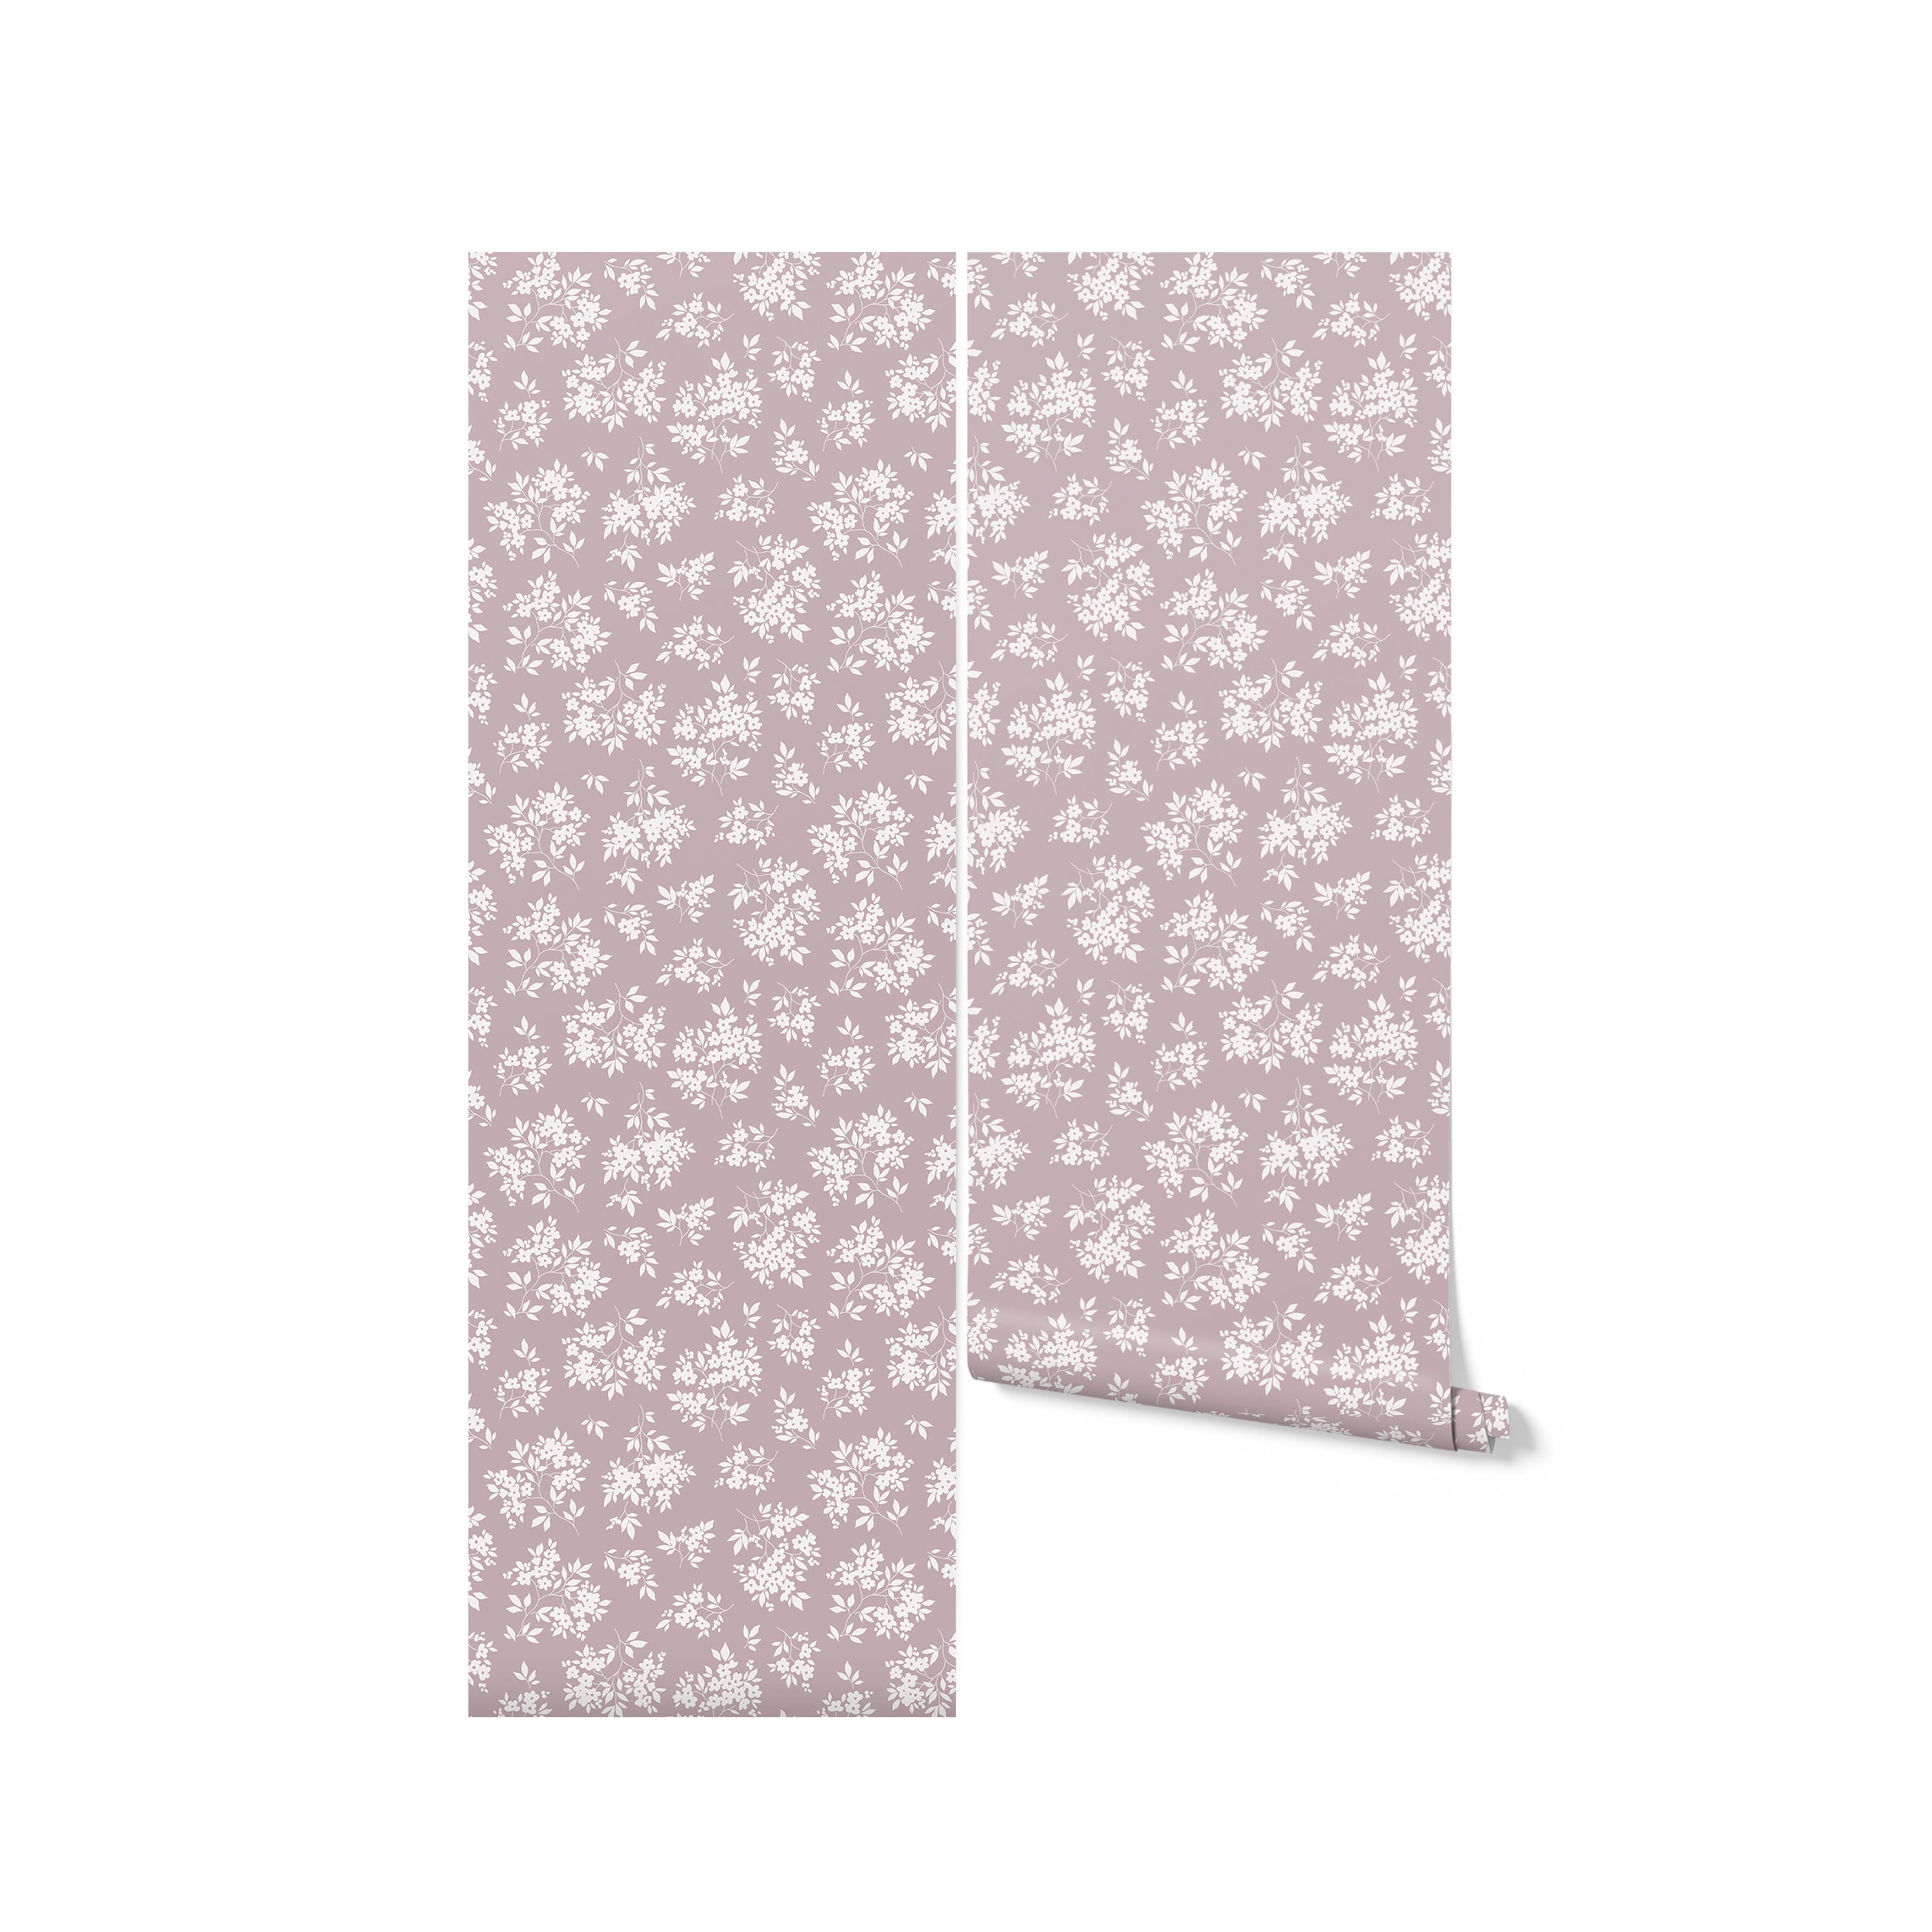 A roll of the Vintage Garden Floral Wallpaper against a plain backdrop to showcase the product. The roll is partially unrolled, displaying the intricate floral pattern. This image gives customers a good understanding of the wallpaper’s texture and color, offering a realistic preview of how the wallpaper might appear in their own space.